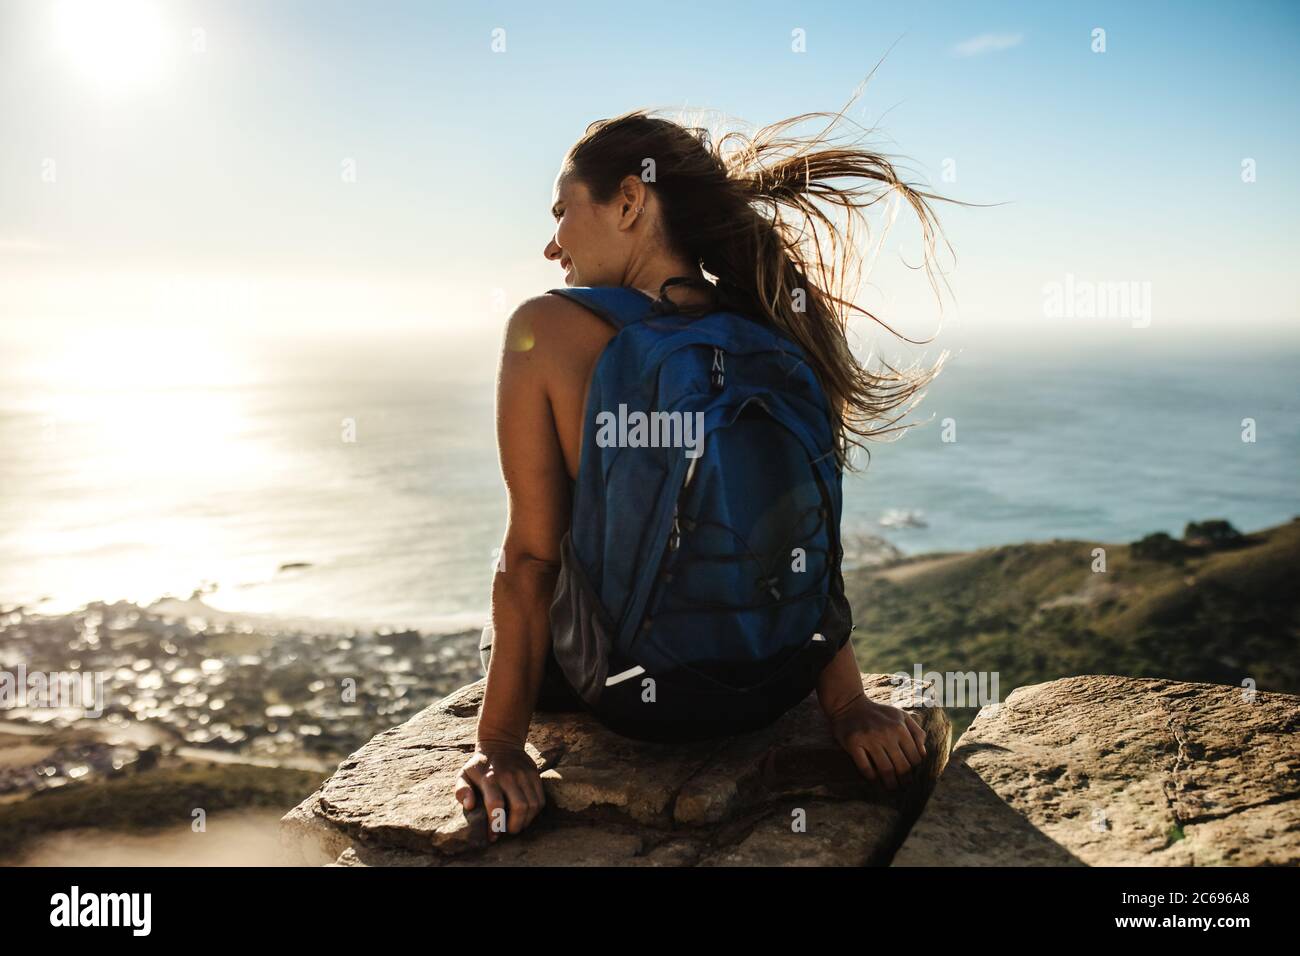 Rear view of a woman with backpack sitting on the cliff and looking at the view Female hiker relaxing on mountain top. Stock Photo